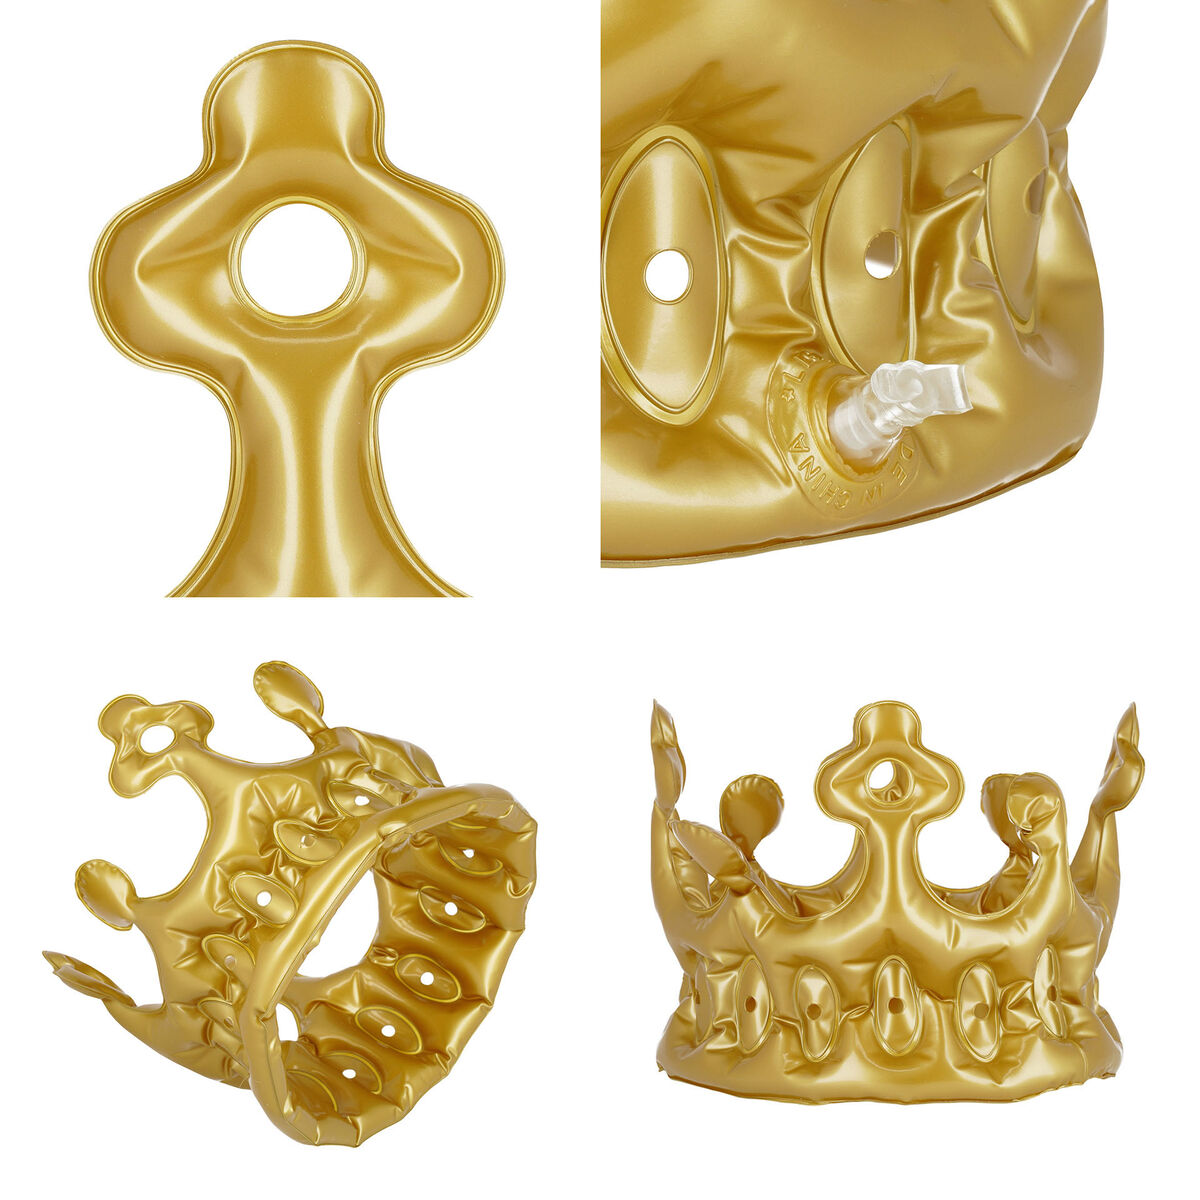 Legami Inflatable Crown Party Queen